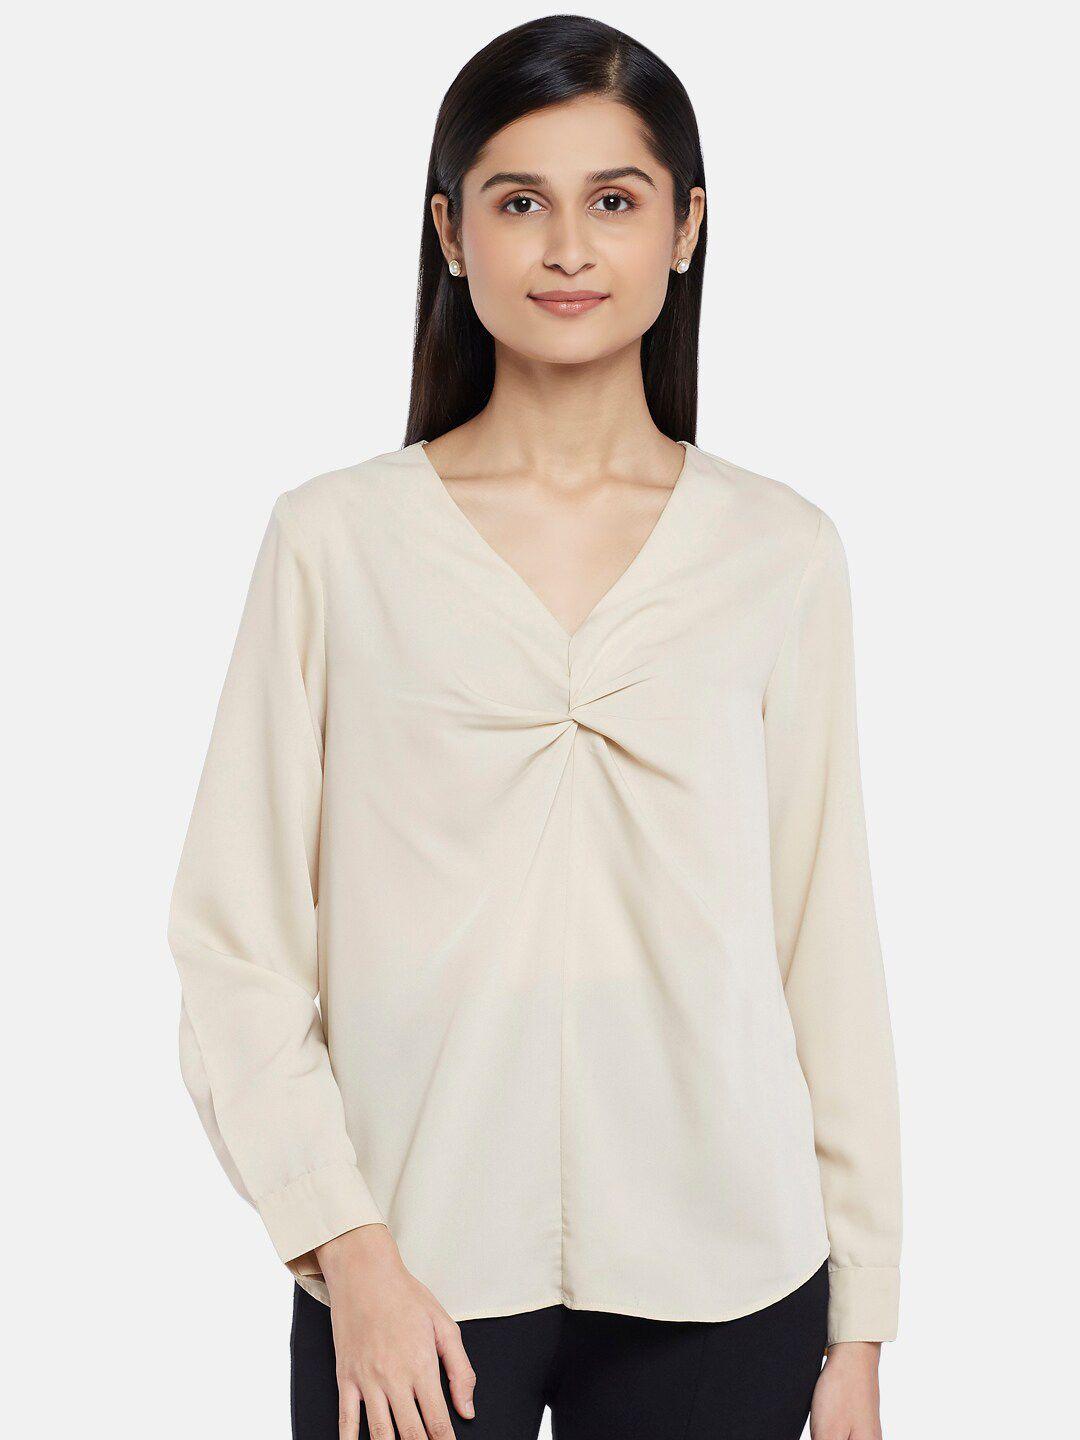 annabelle by pantaloons beige twisted shirt style top